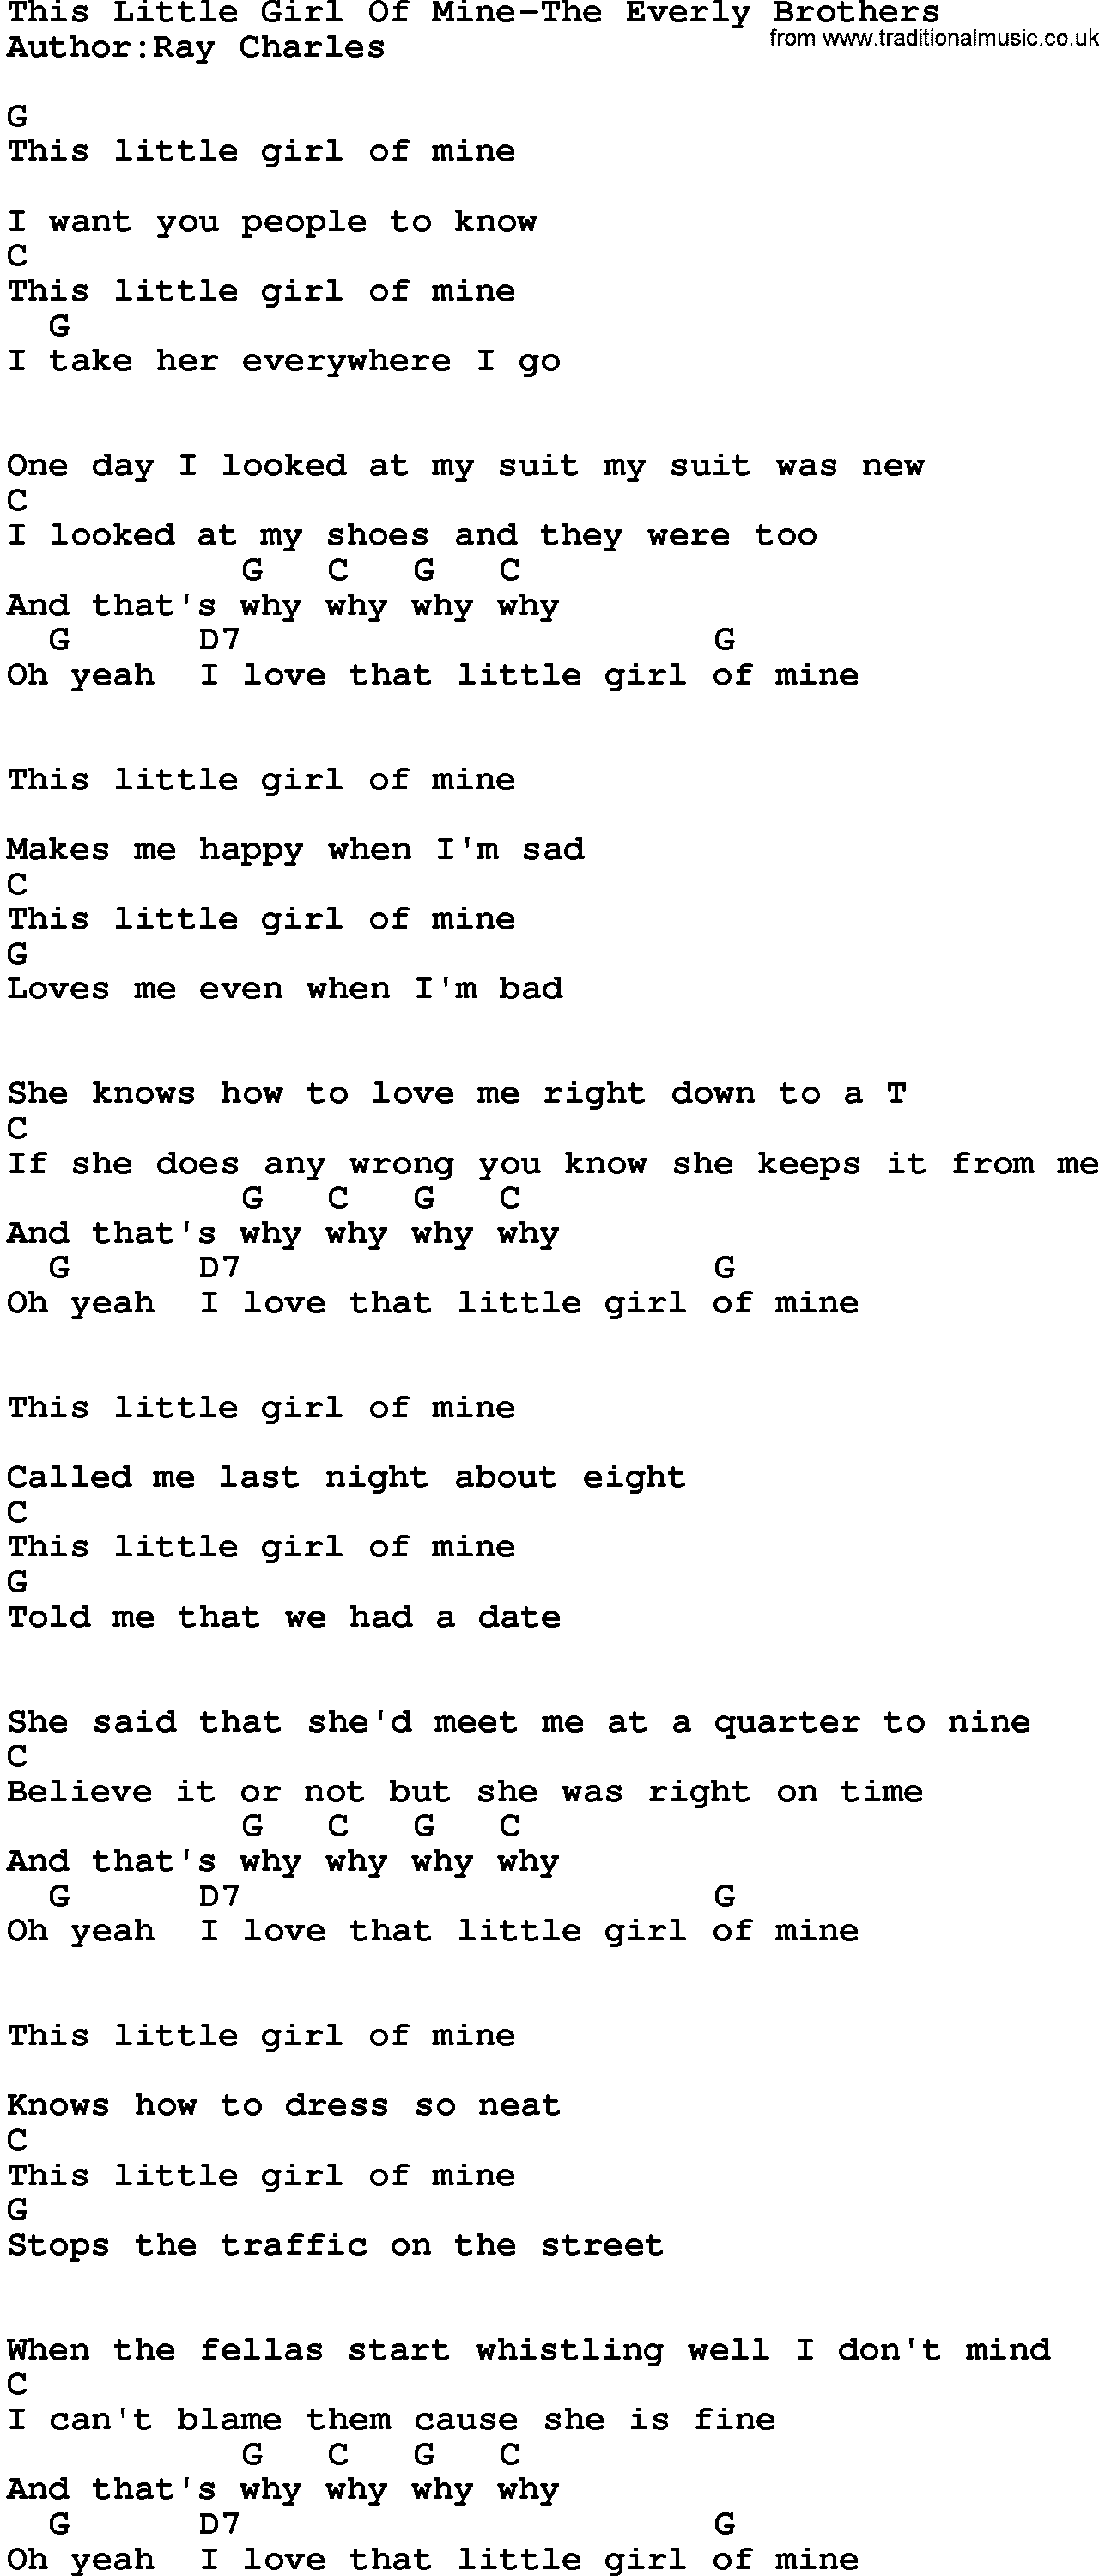 Country music song: This Little Girl Of Mine-The Everly Brothers lyrics and chords